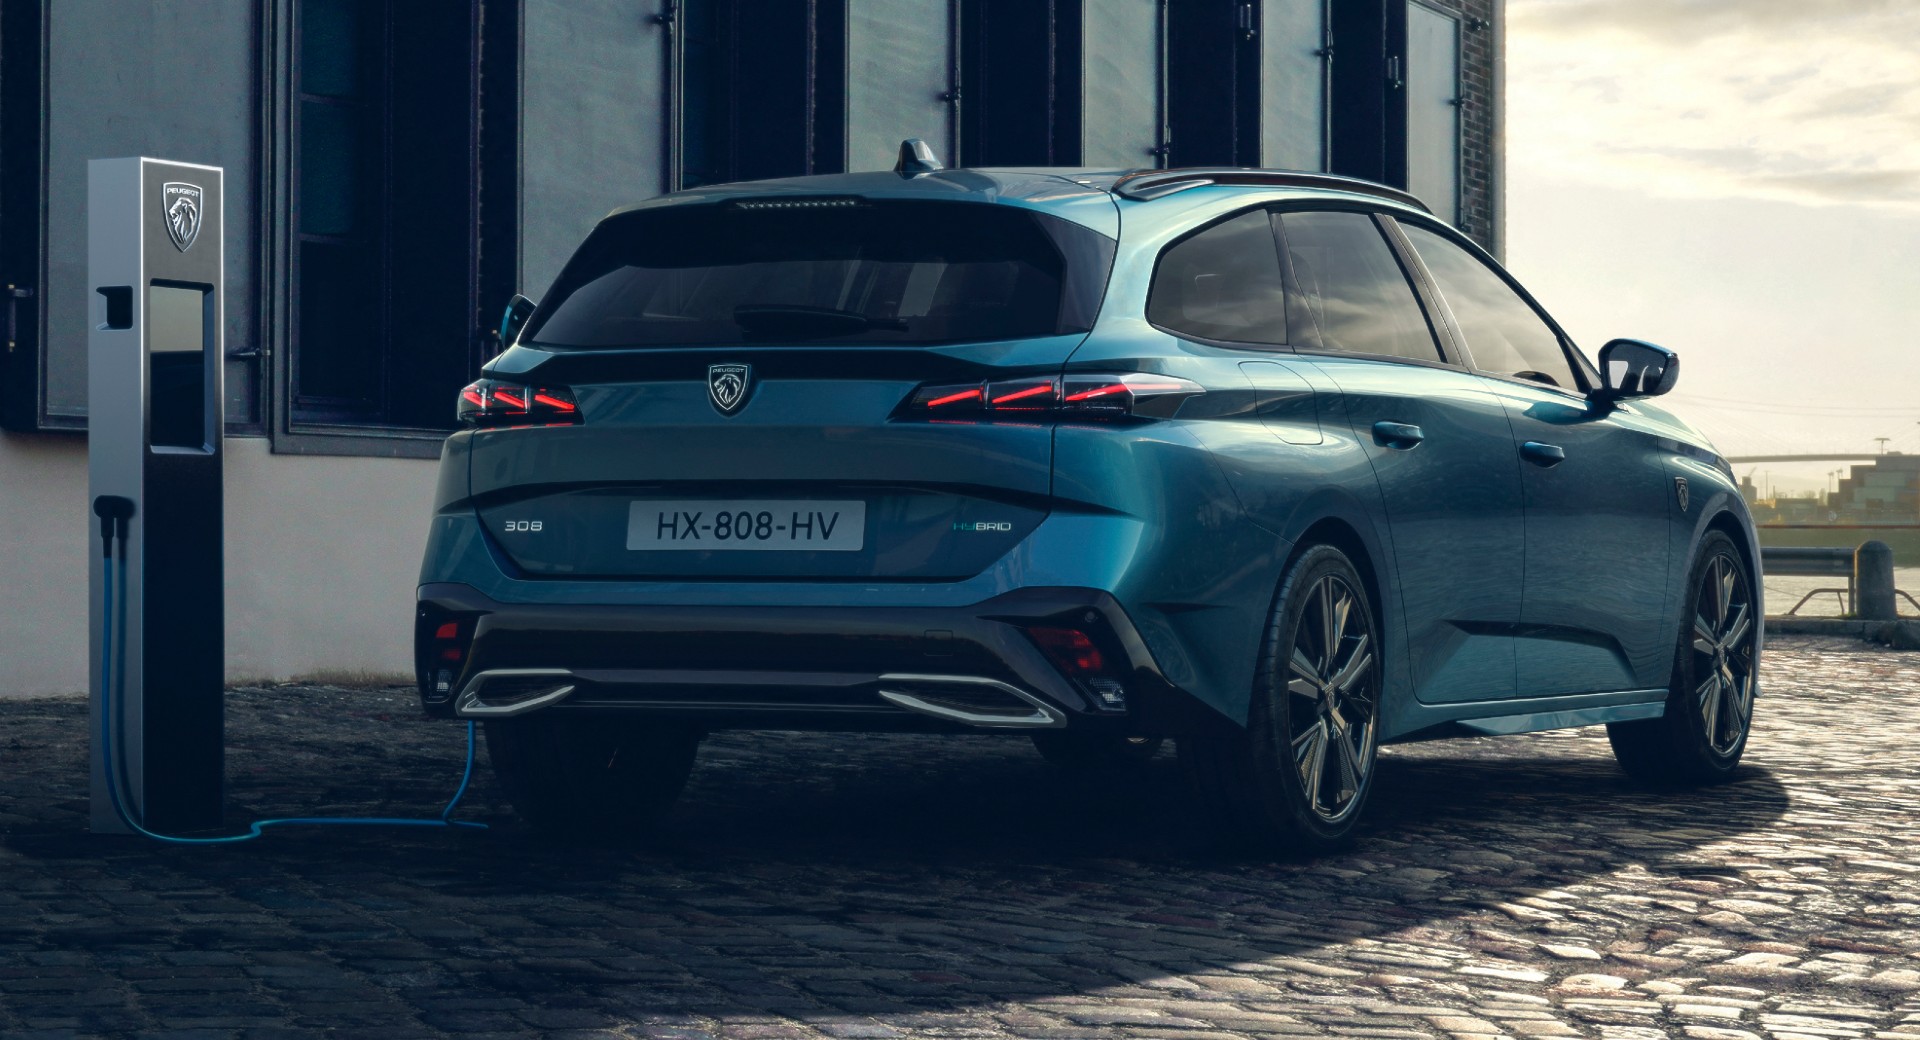 New Peugeot 308 hatchback debuts with plug-in power, redesigned logo - CNET